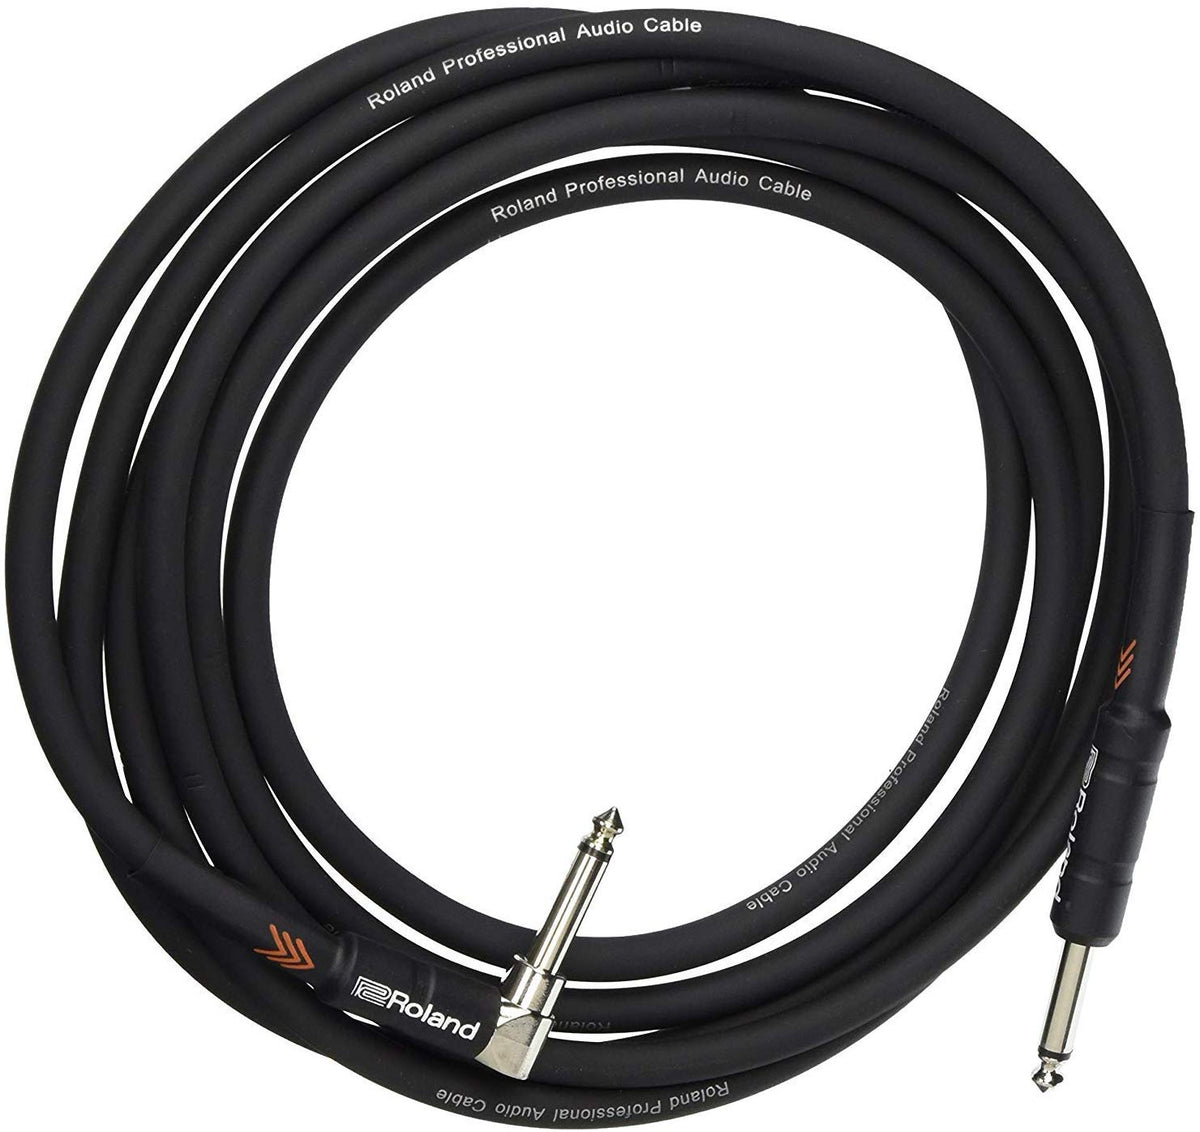 Series　Warehouse　Roland　Music　Instrument　ANG/STRT　JACK　Cable　Black　RIC-B10　10FT　1/4'　–　CBN